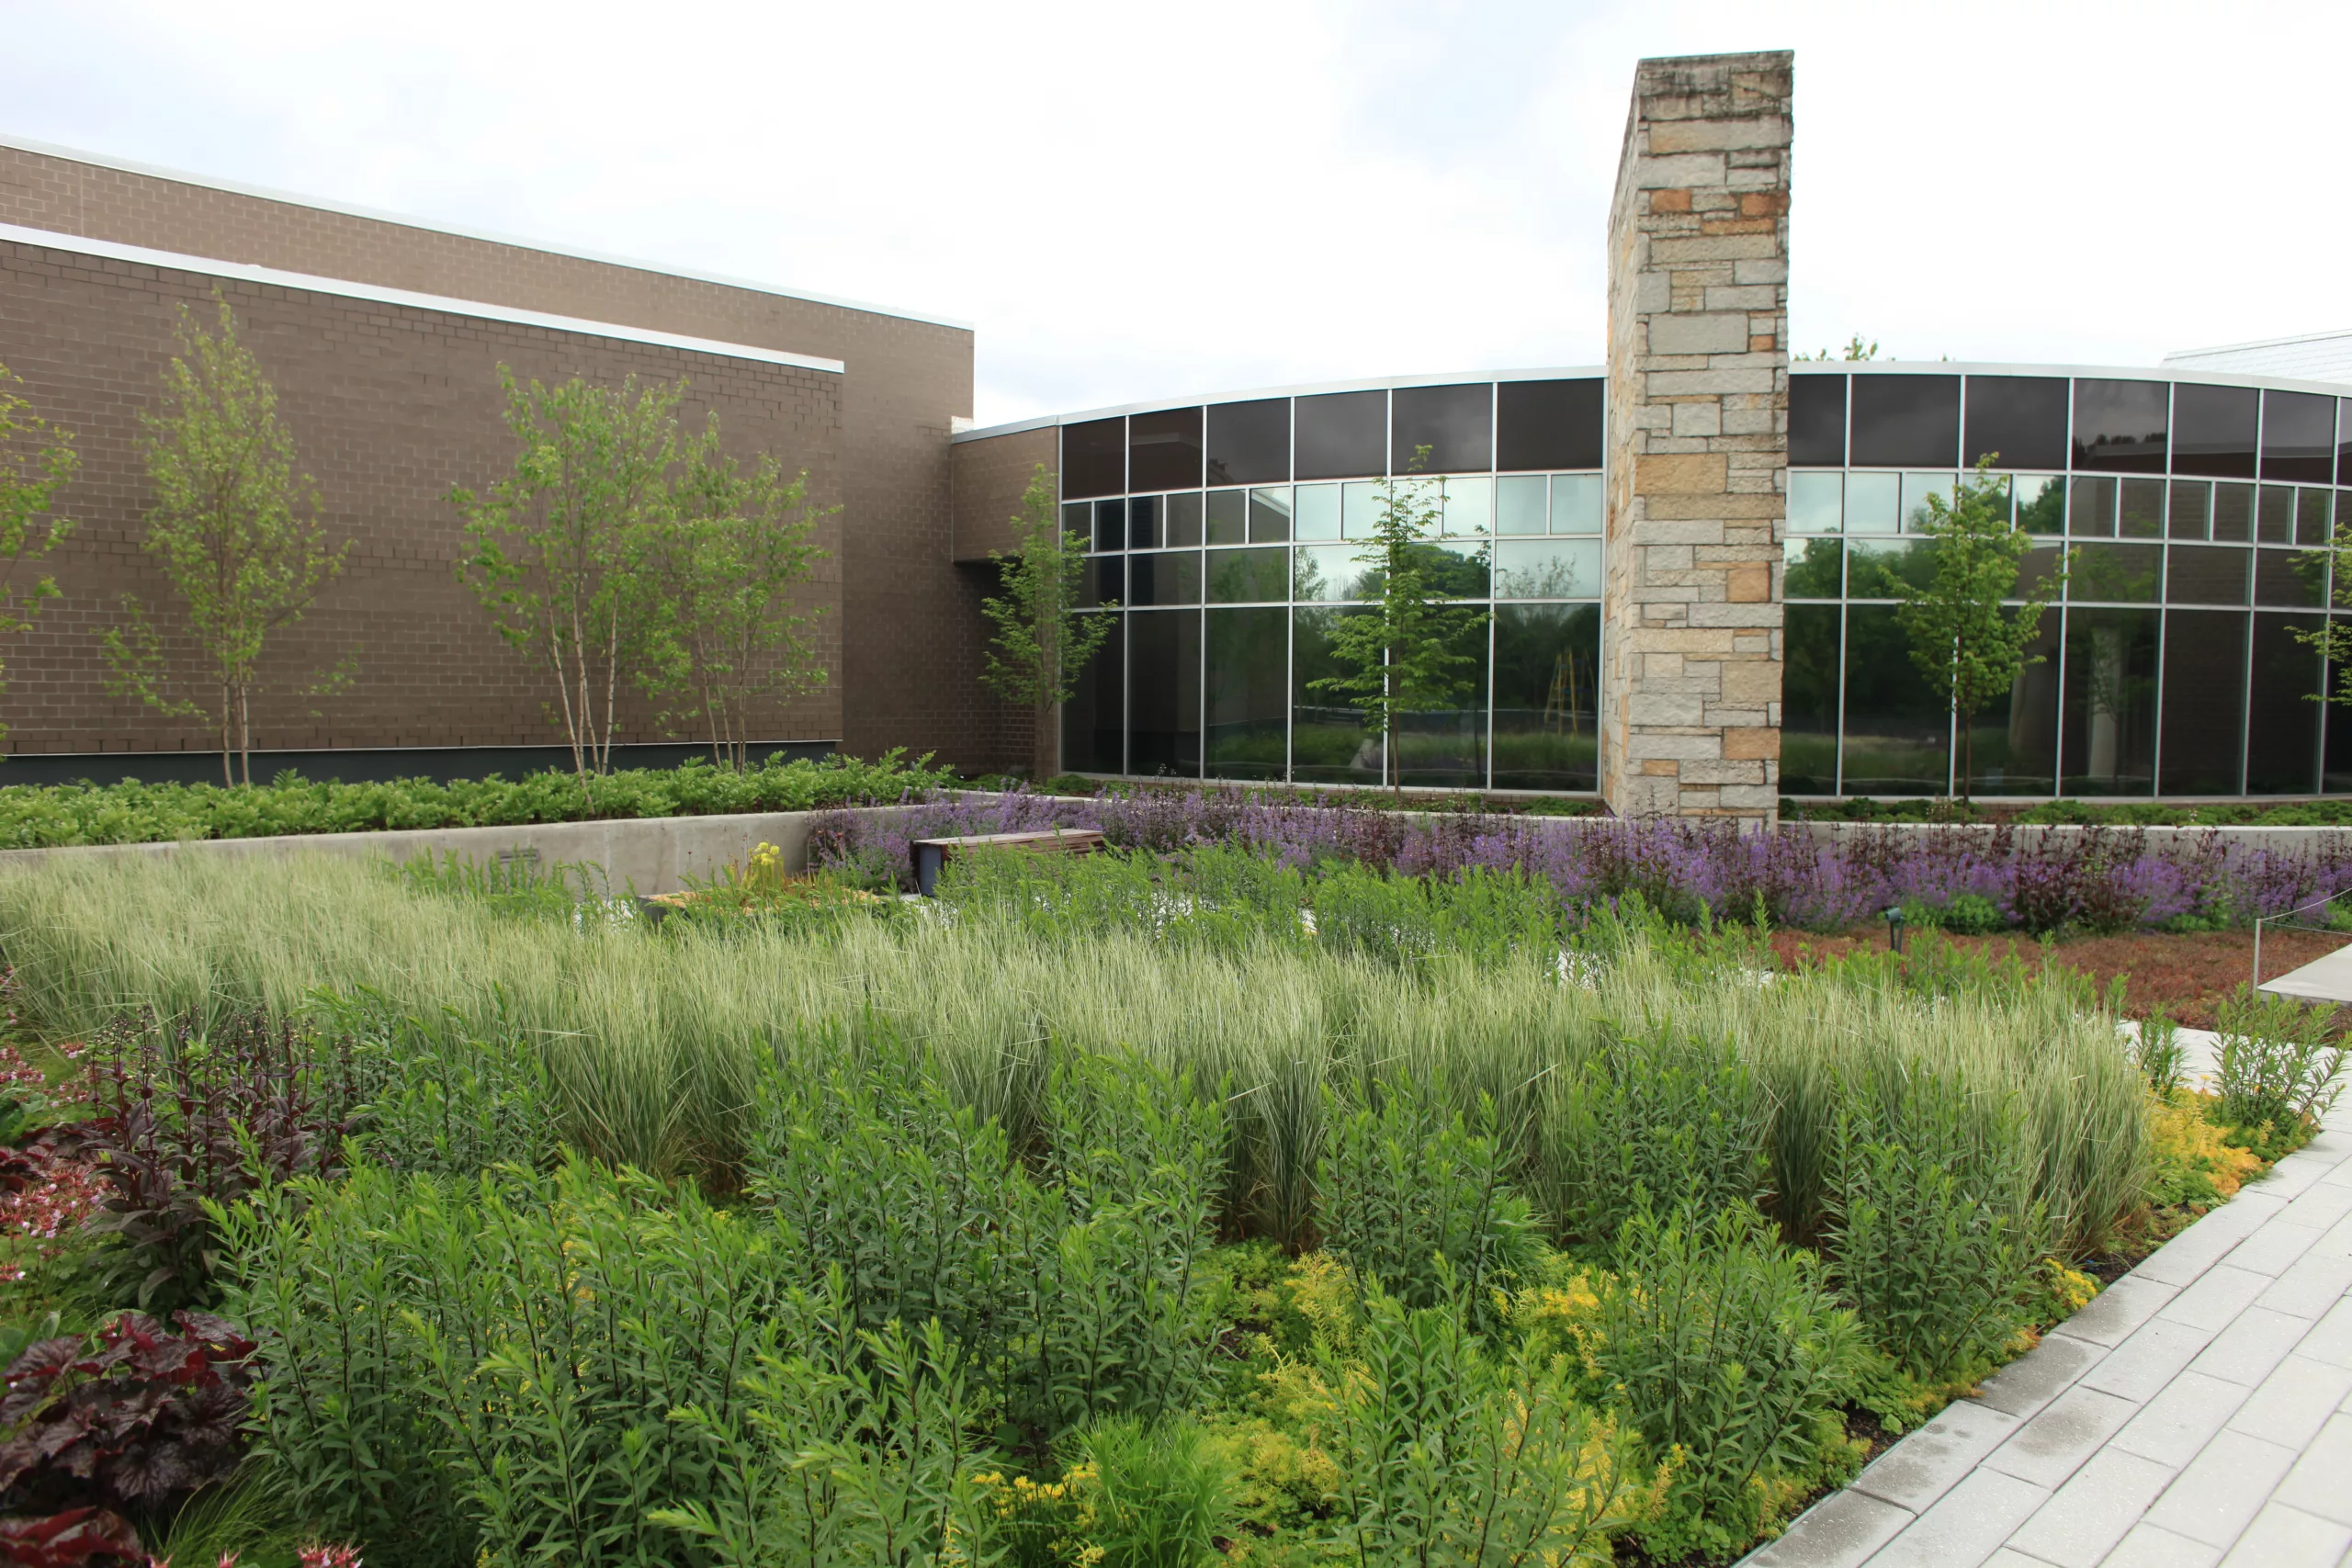 Irrigation Leader Magazine Feature: Green Roofs for Water Retention and Horticulture